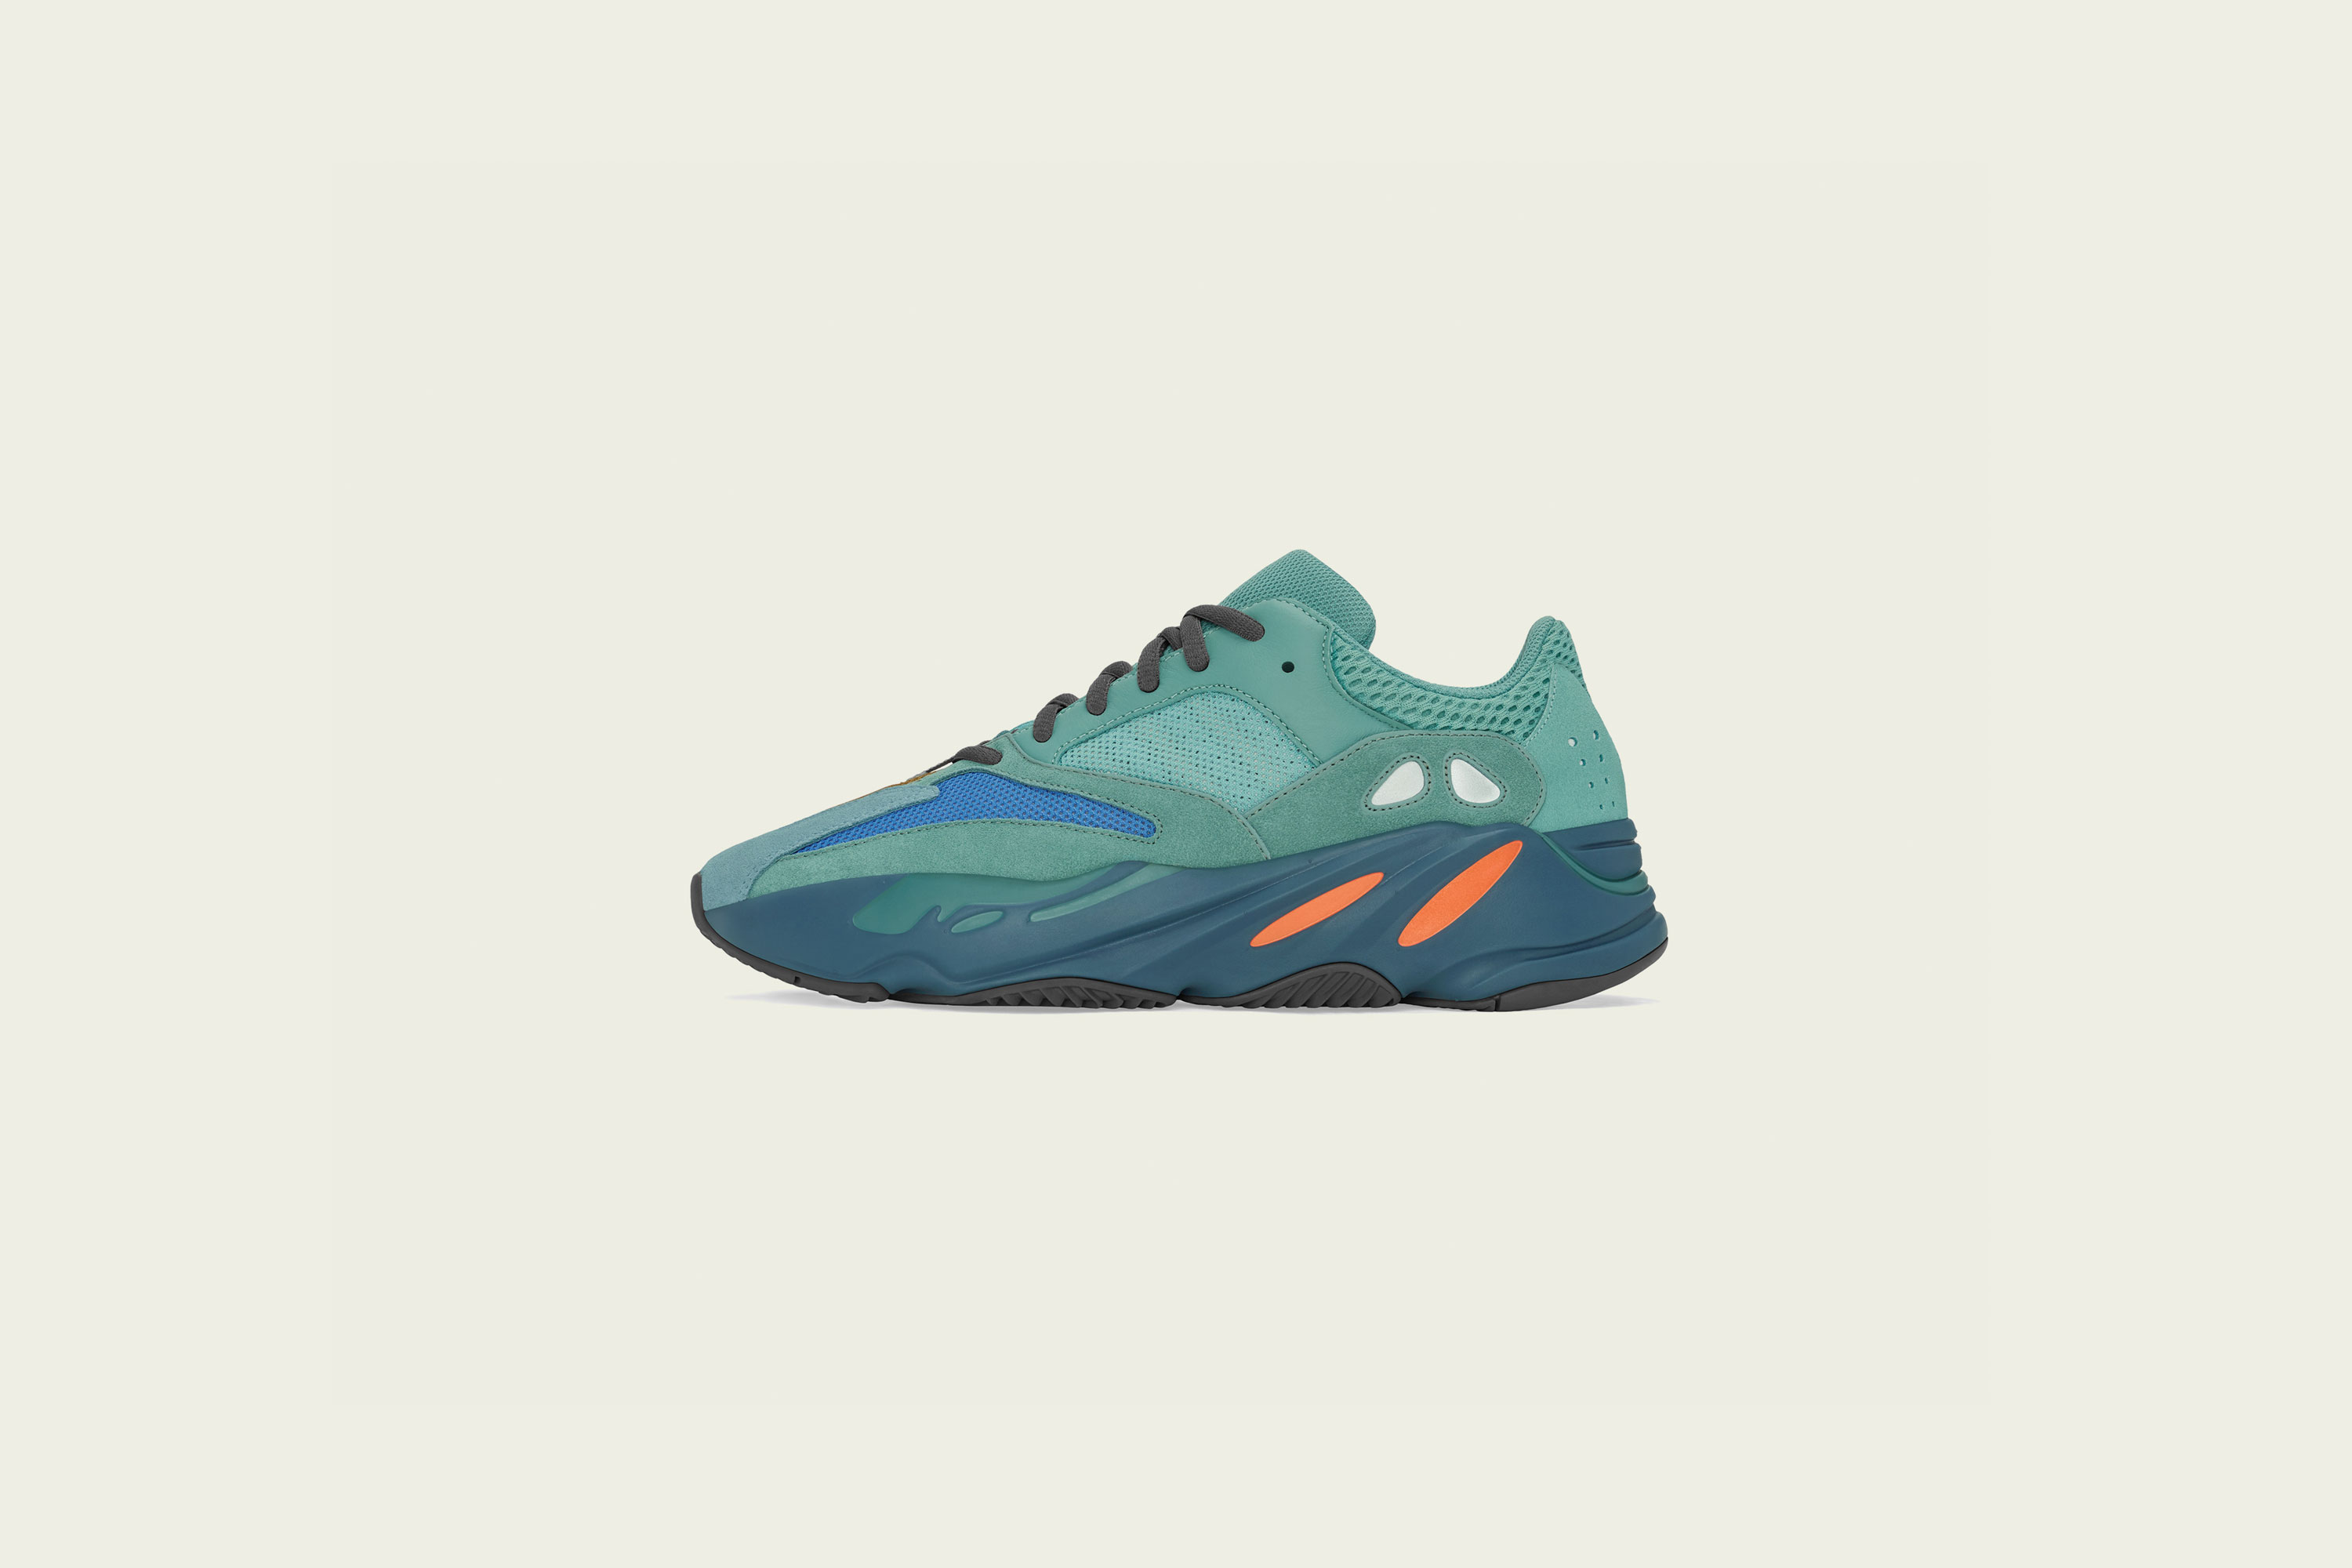 adidas - Yeezy Boost 700 - Fade Azure - Up There